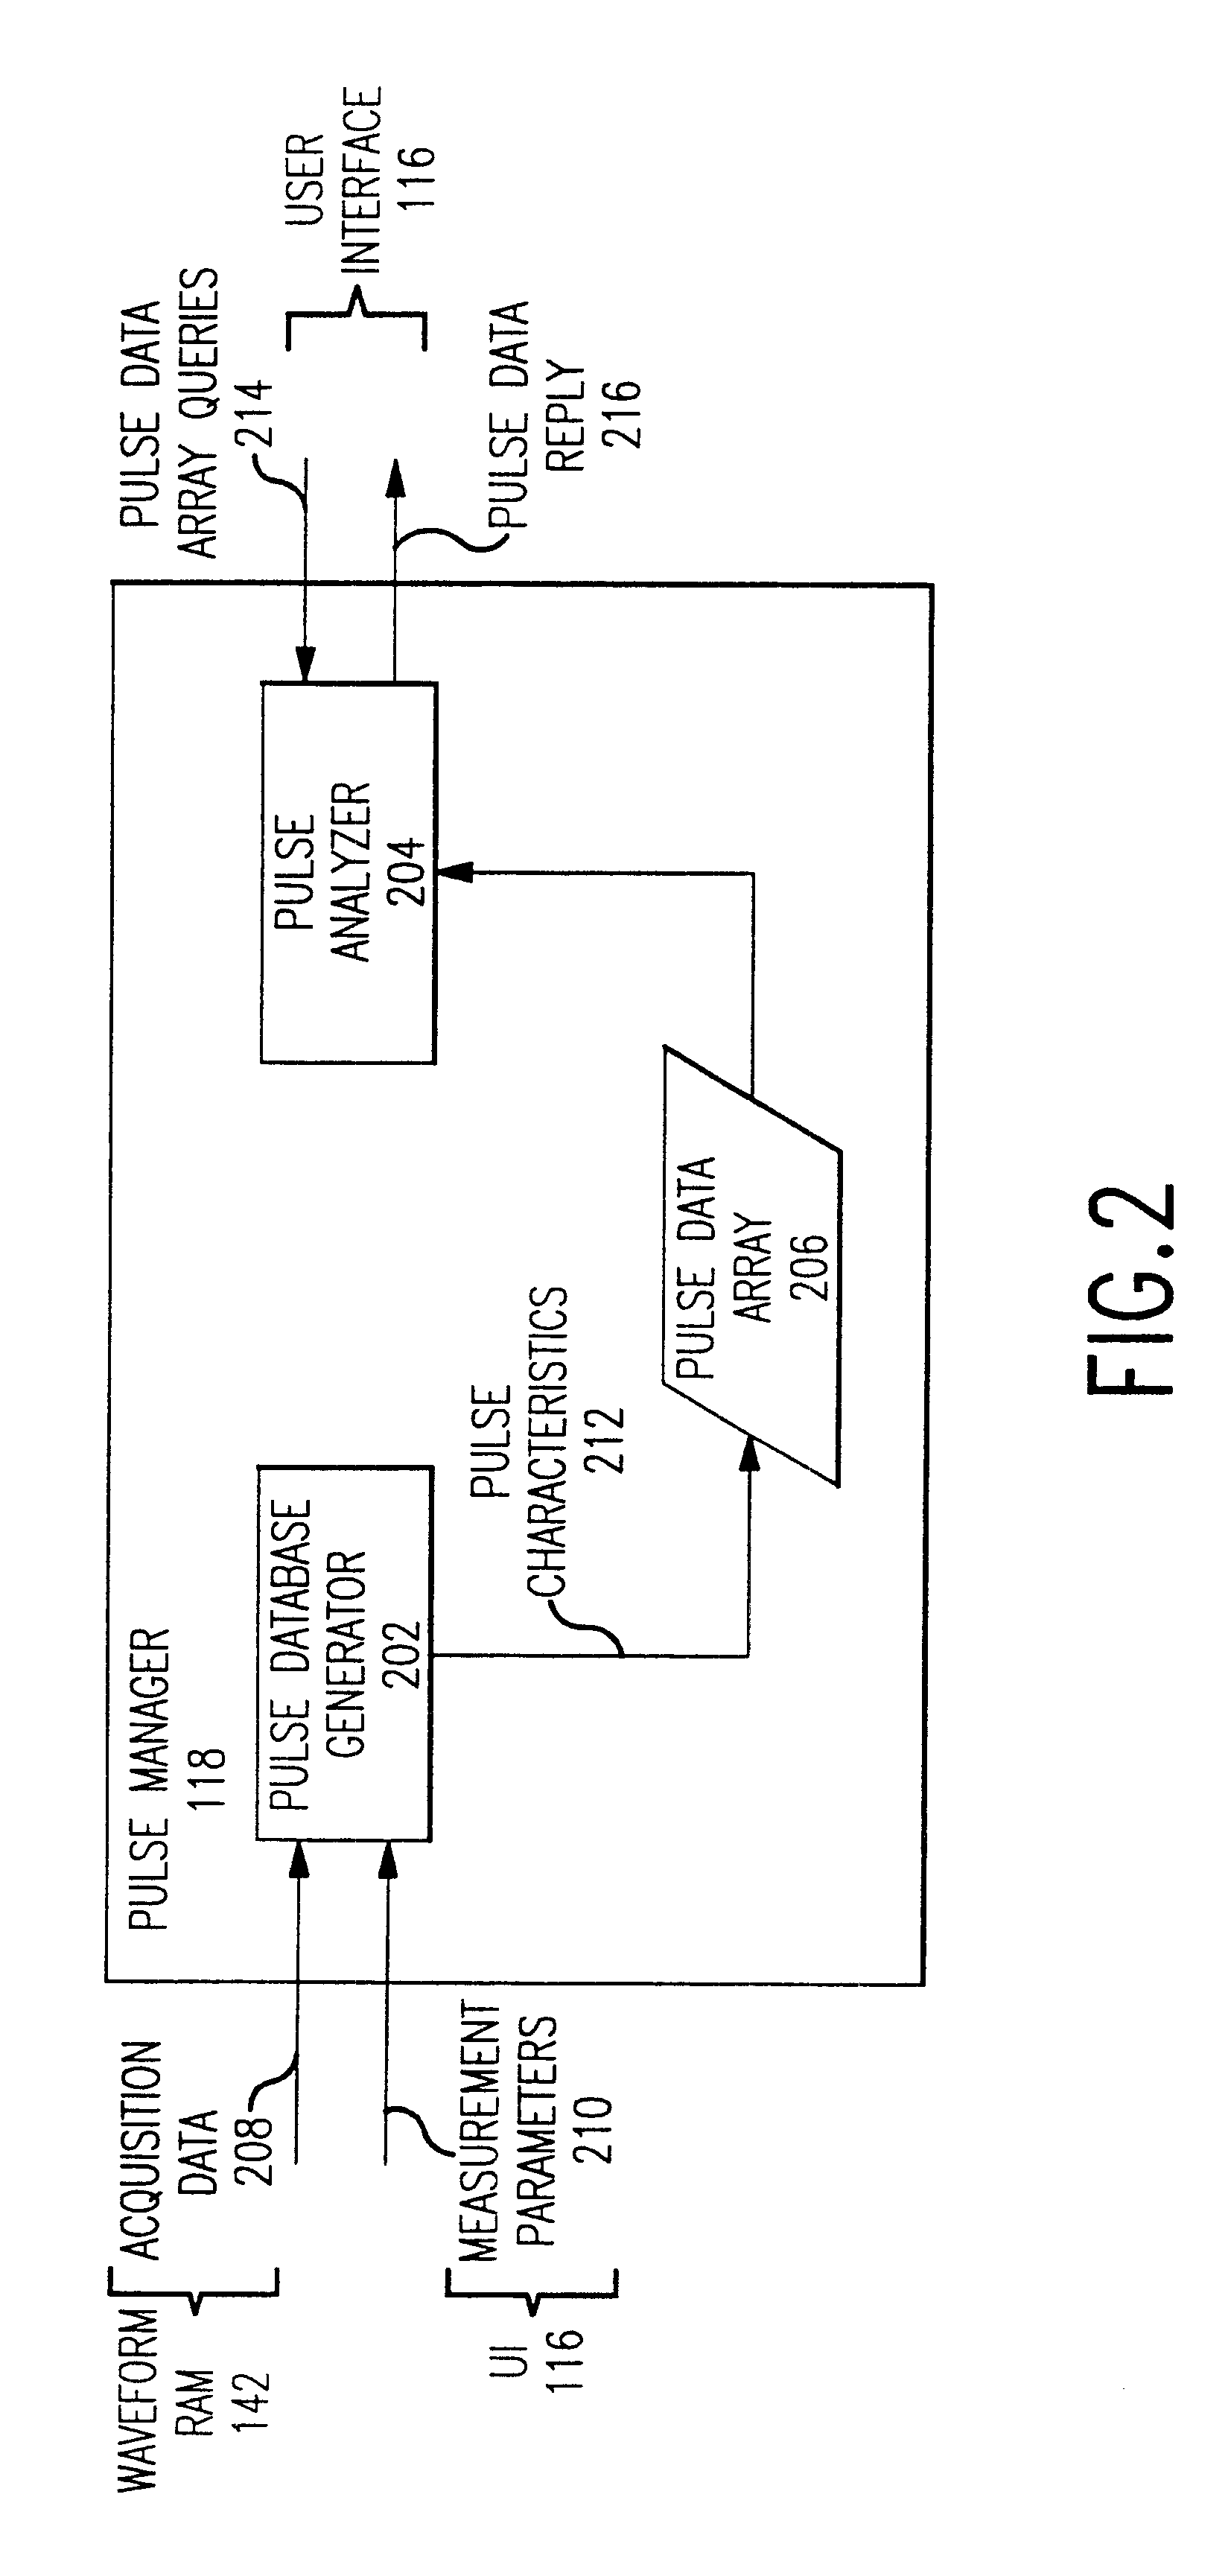 System and method for enabling an operator to analyze a database of acquired signal pulse characteristics